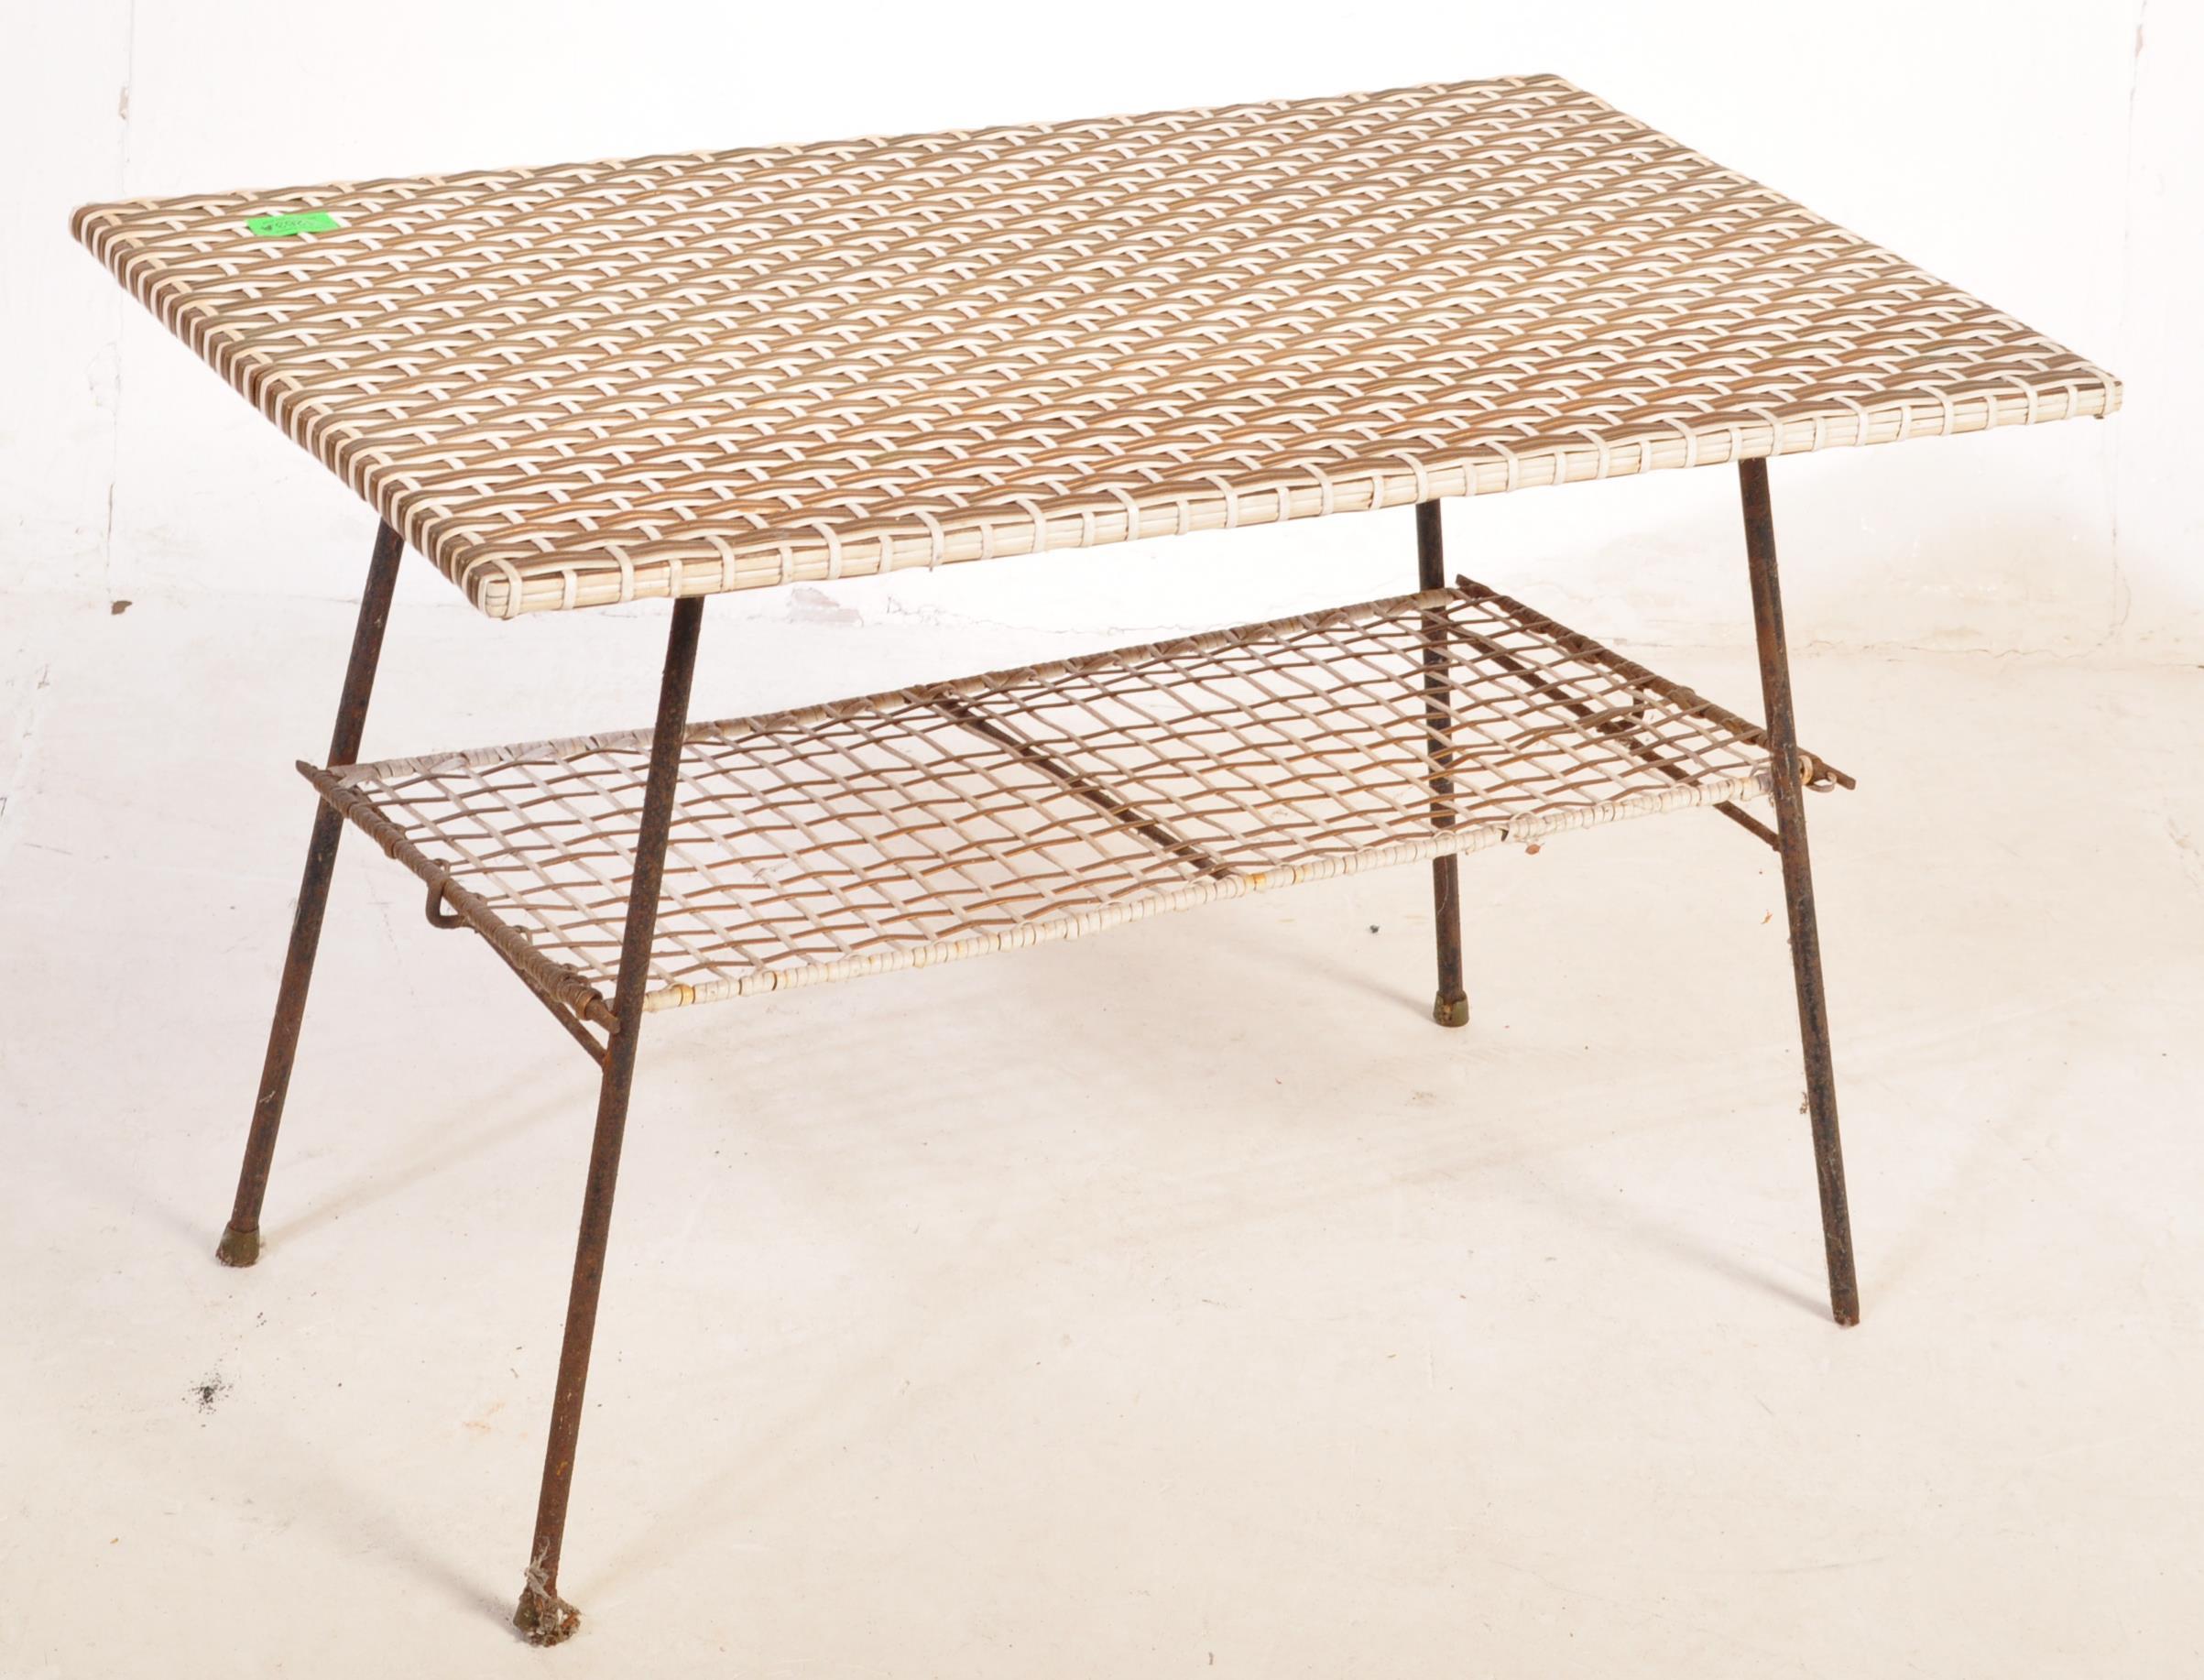 A RETRO VINTAGE WOVEN COFFEE TABLE - Image 2 of 4